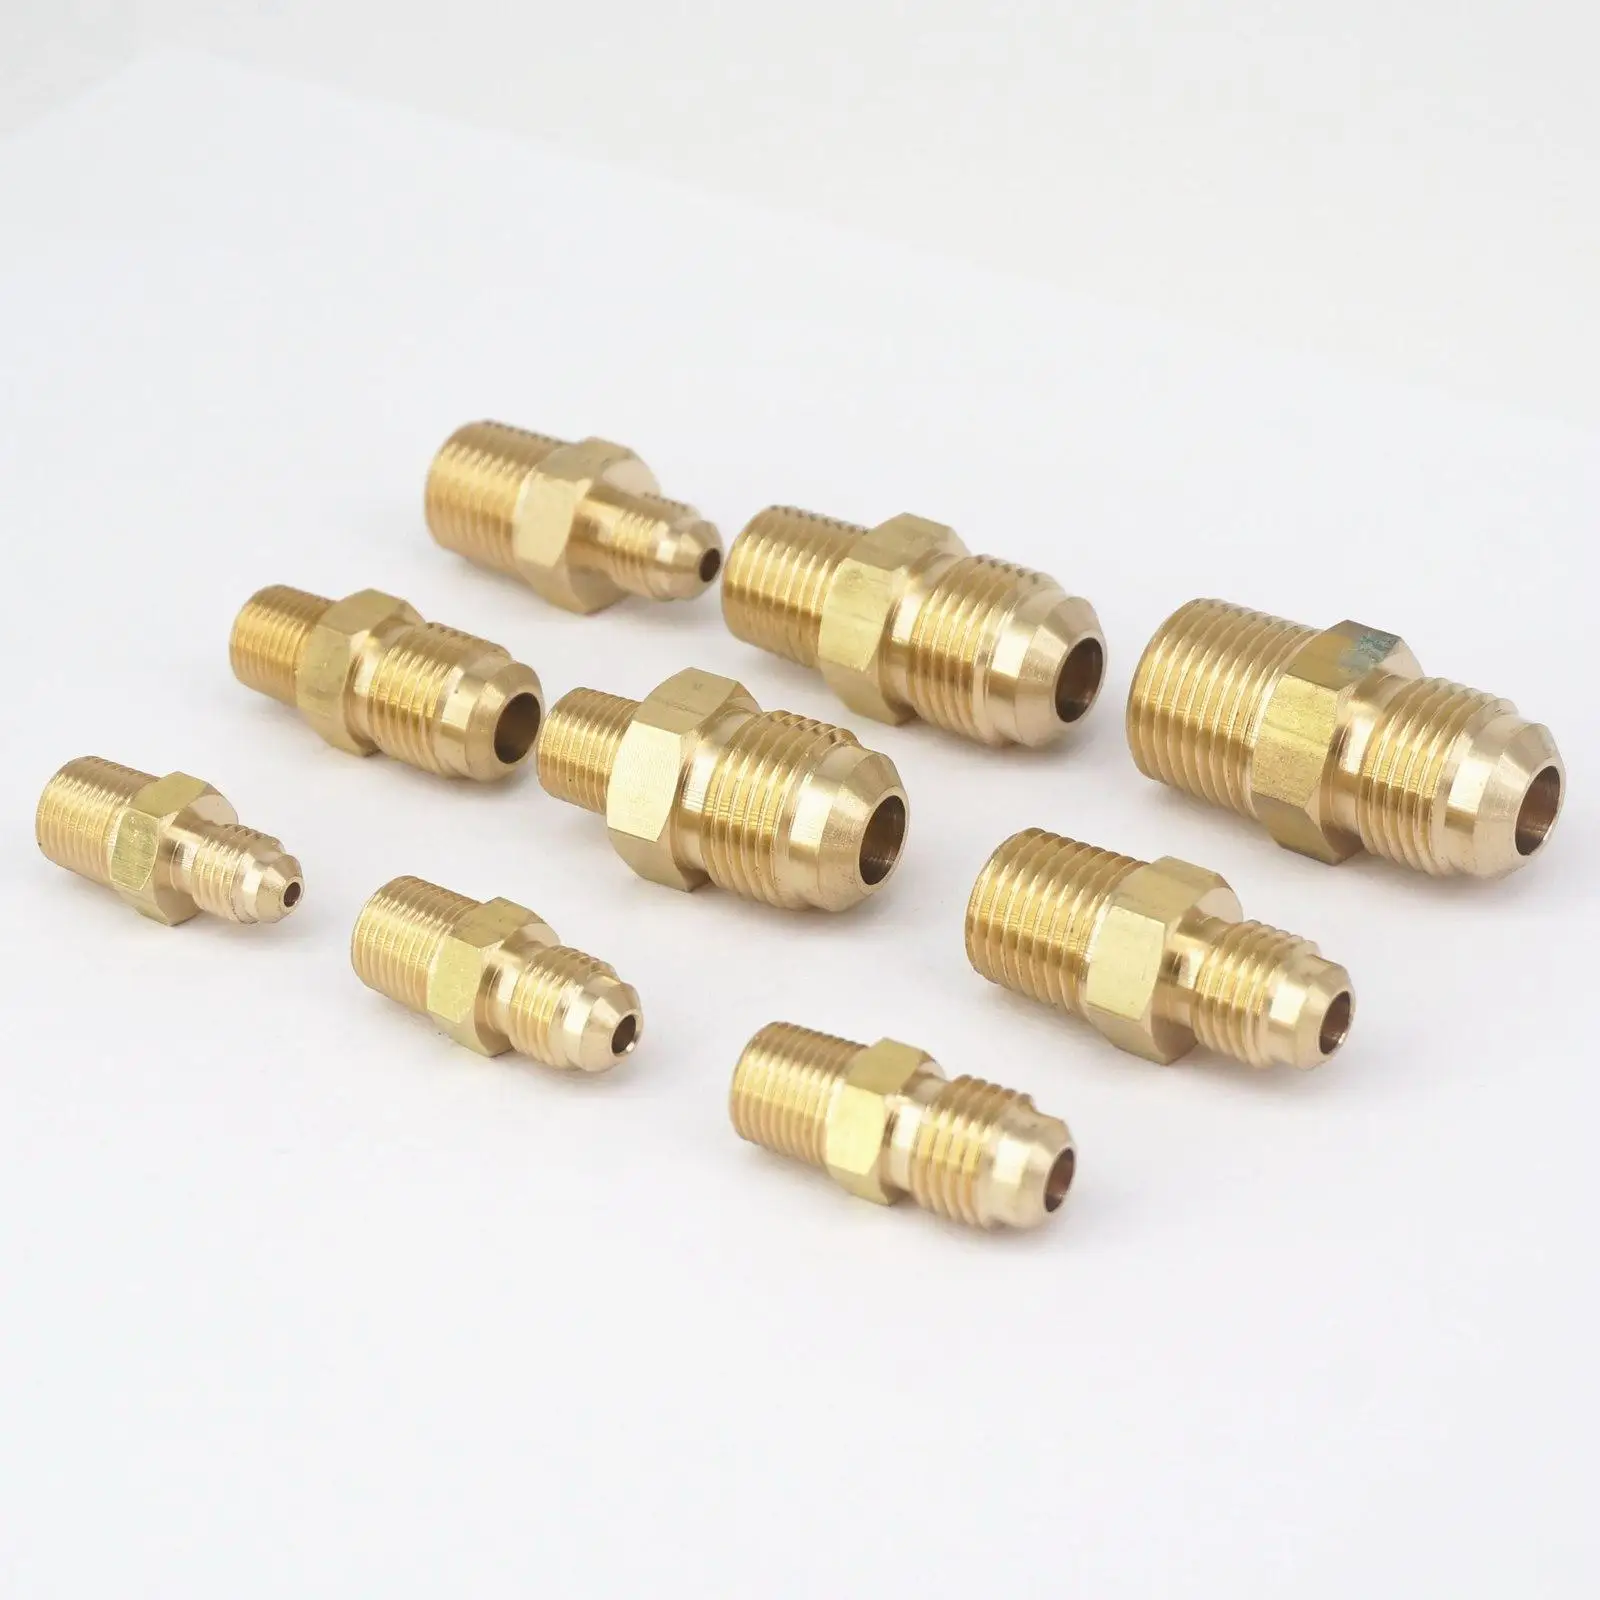 BR-15 1/4" Male Flare x 3/8" Male Flare FOR TUBING O.D Details about   Brass FLARE Adapter 